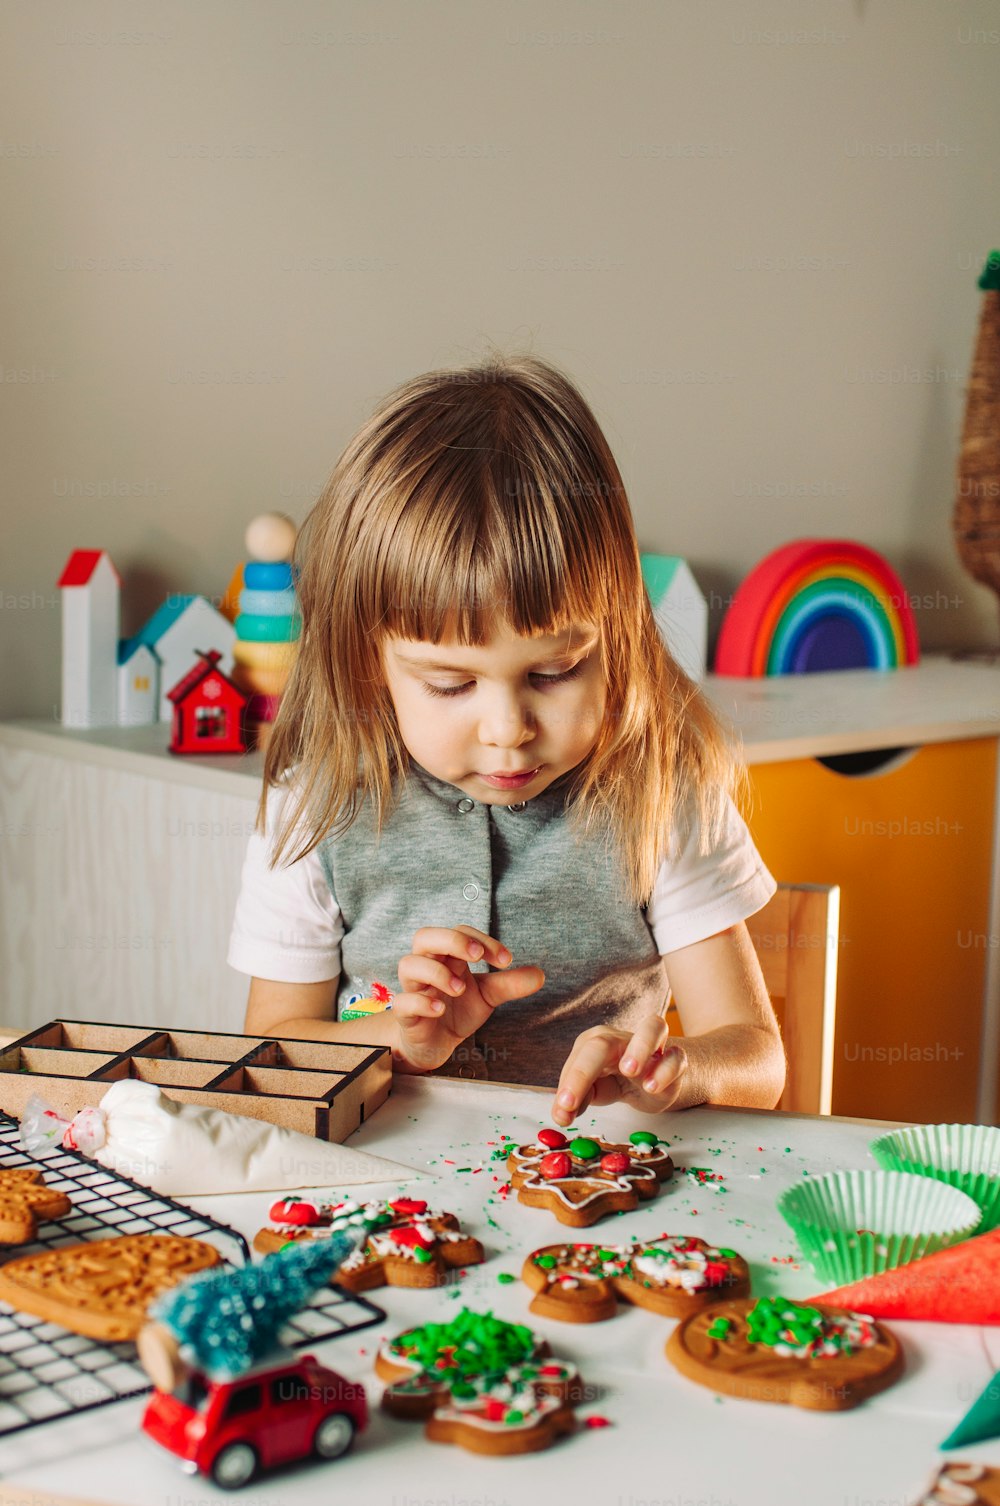 Little girl decorating Christmas gingerbread cookies with sprinkles and chocolate candies.